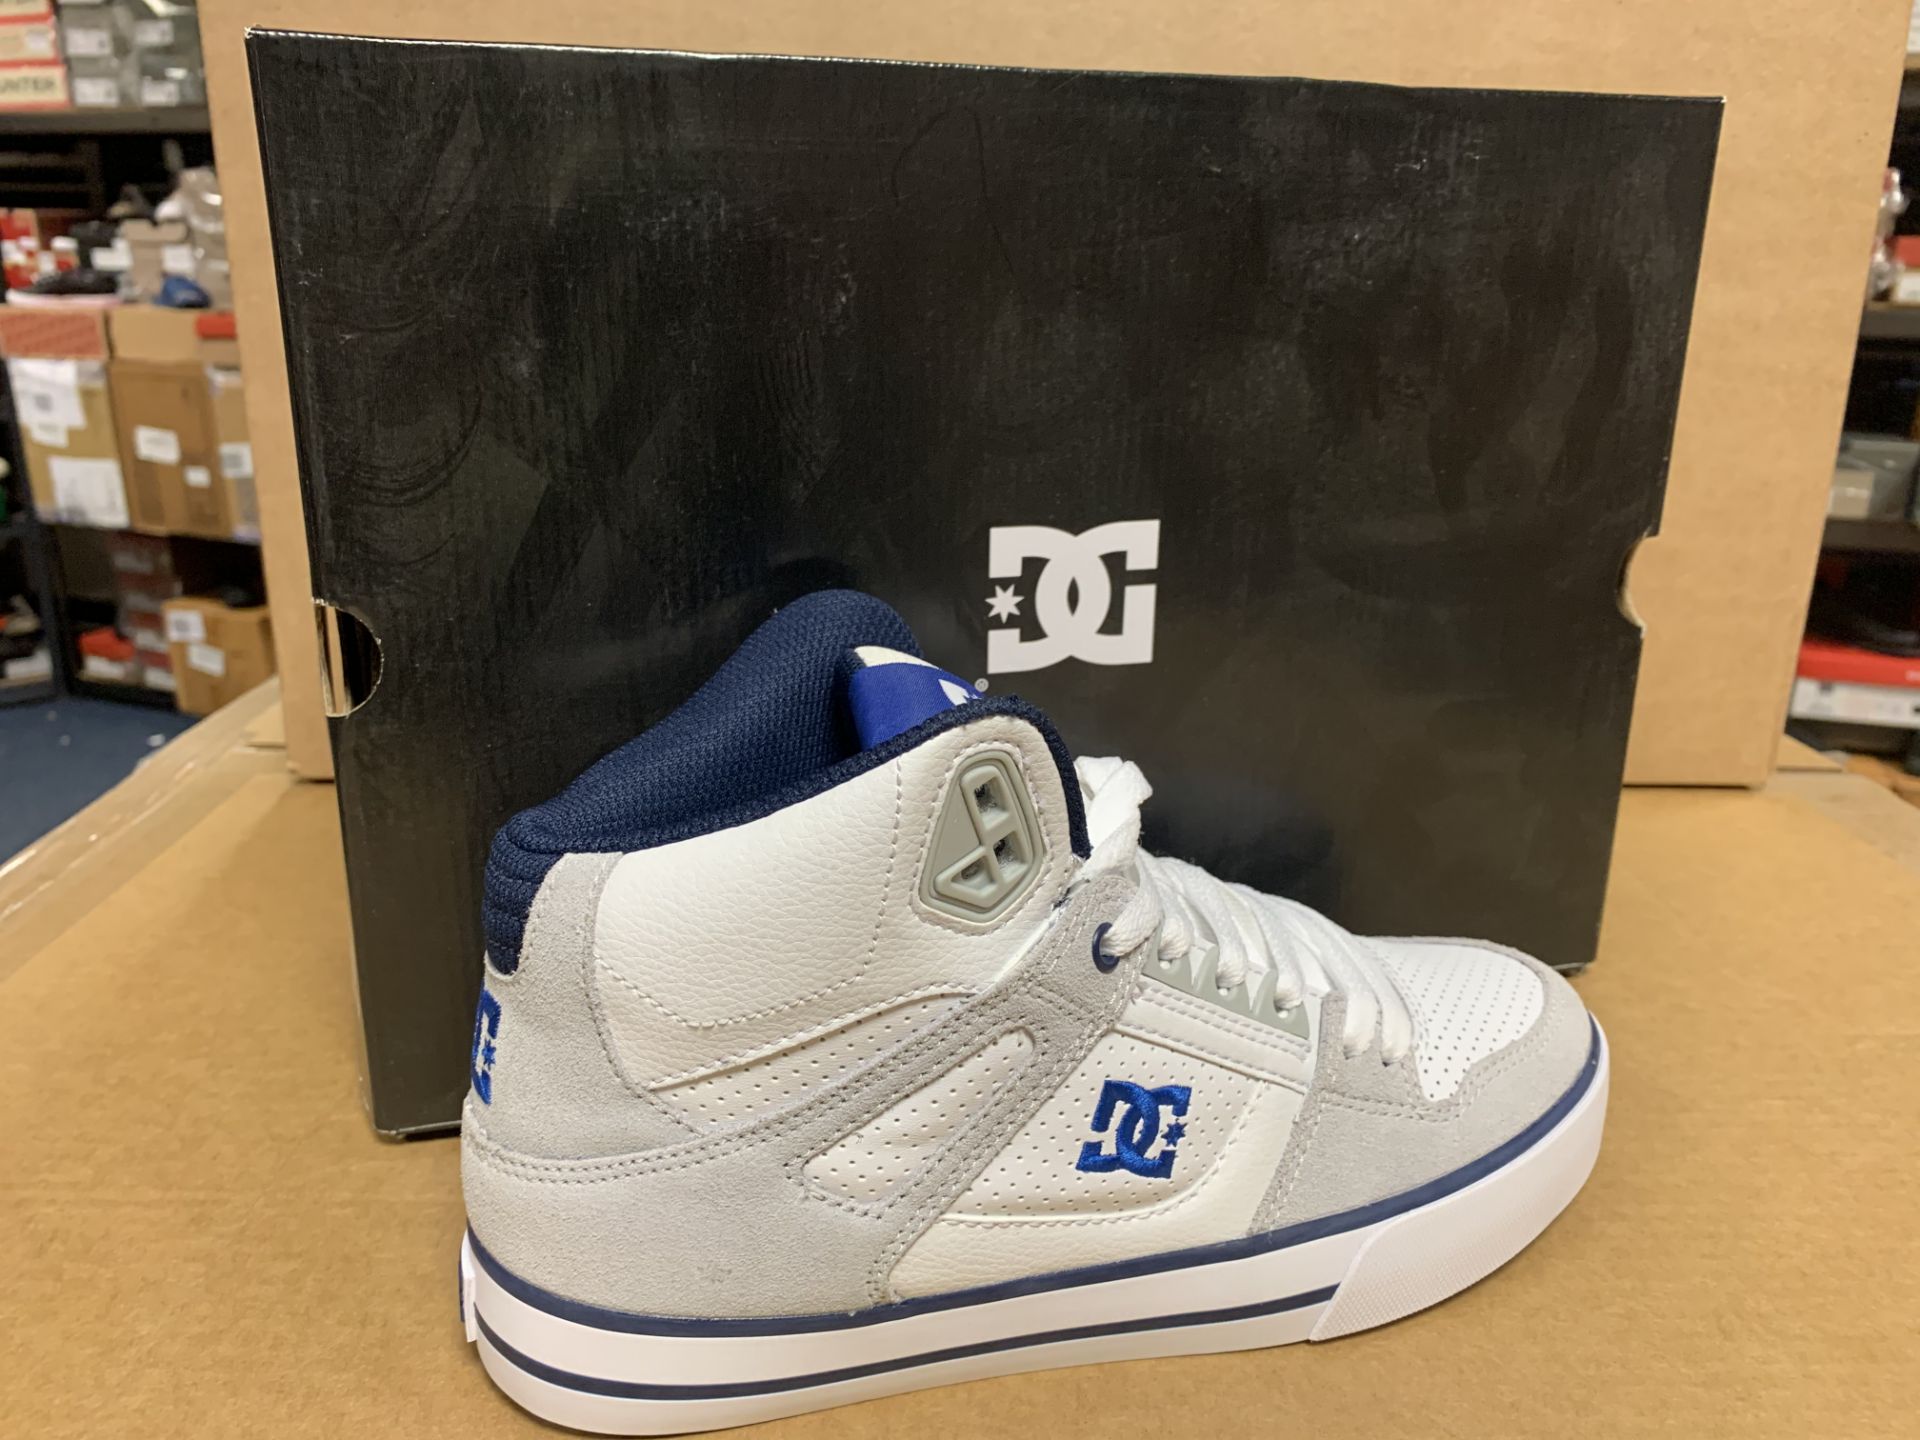 4 X BRAND NEW DC SHOE PURE HIGH TOP WHITE AND BLUE TRAINERS SIZE 6 RRP £85 EACH